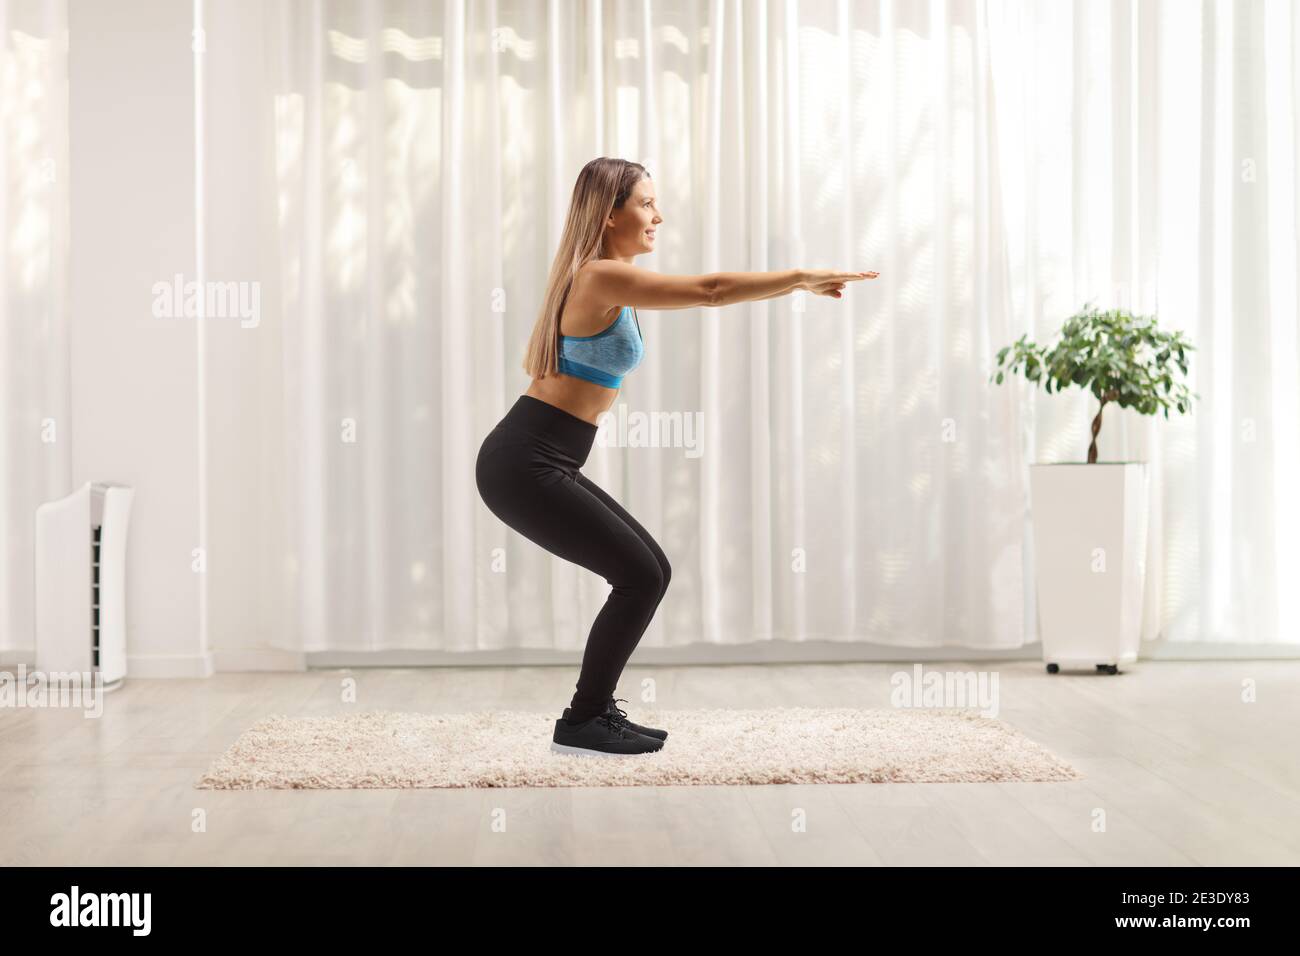 Full length profile shot of a young woman in sportswear doing squat exercises at home Stock Photo